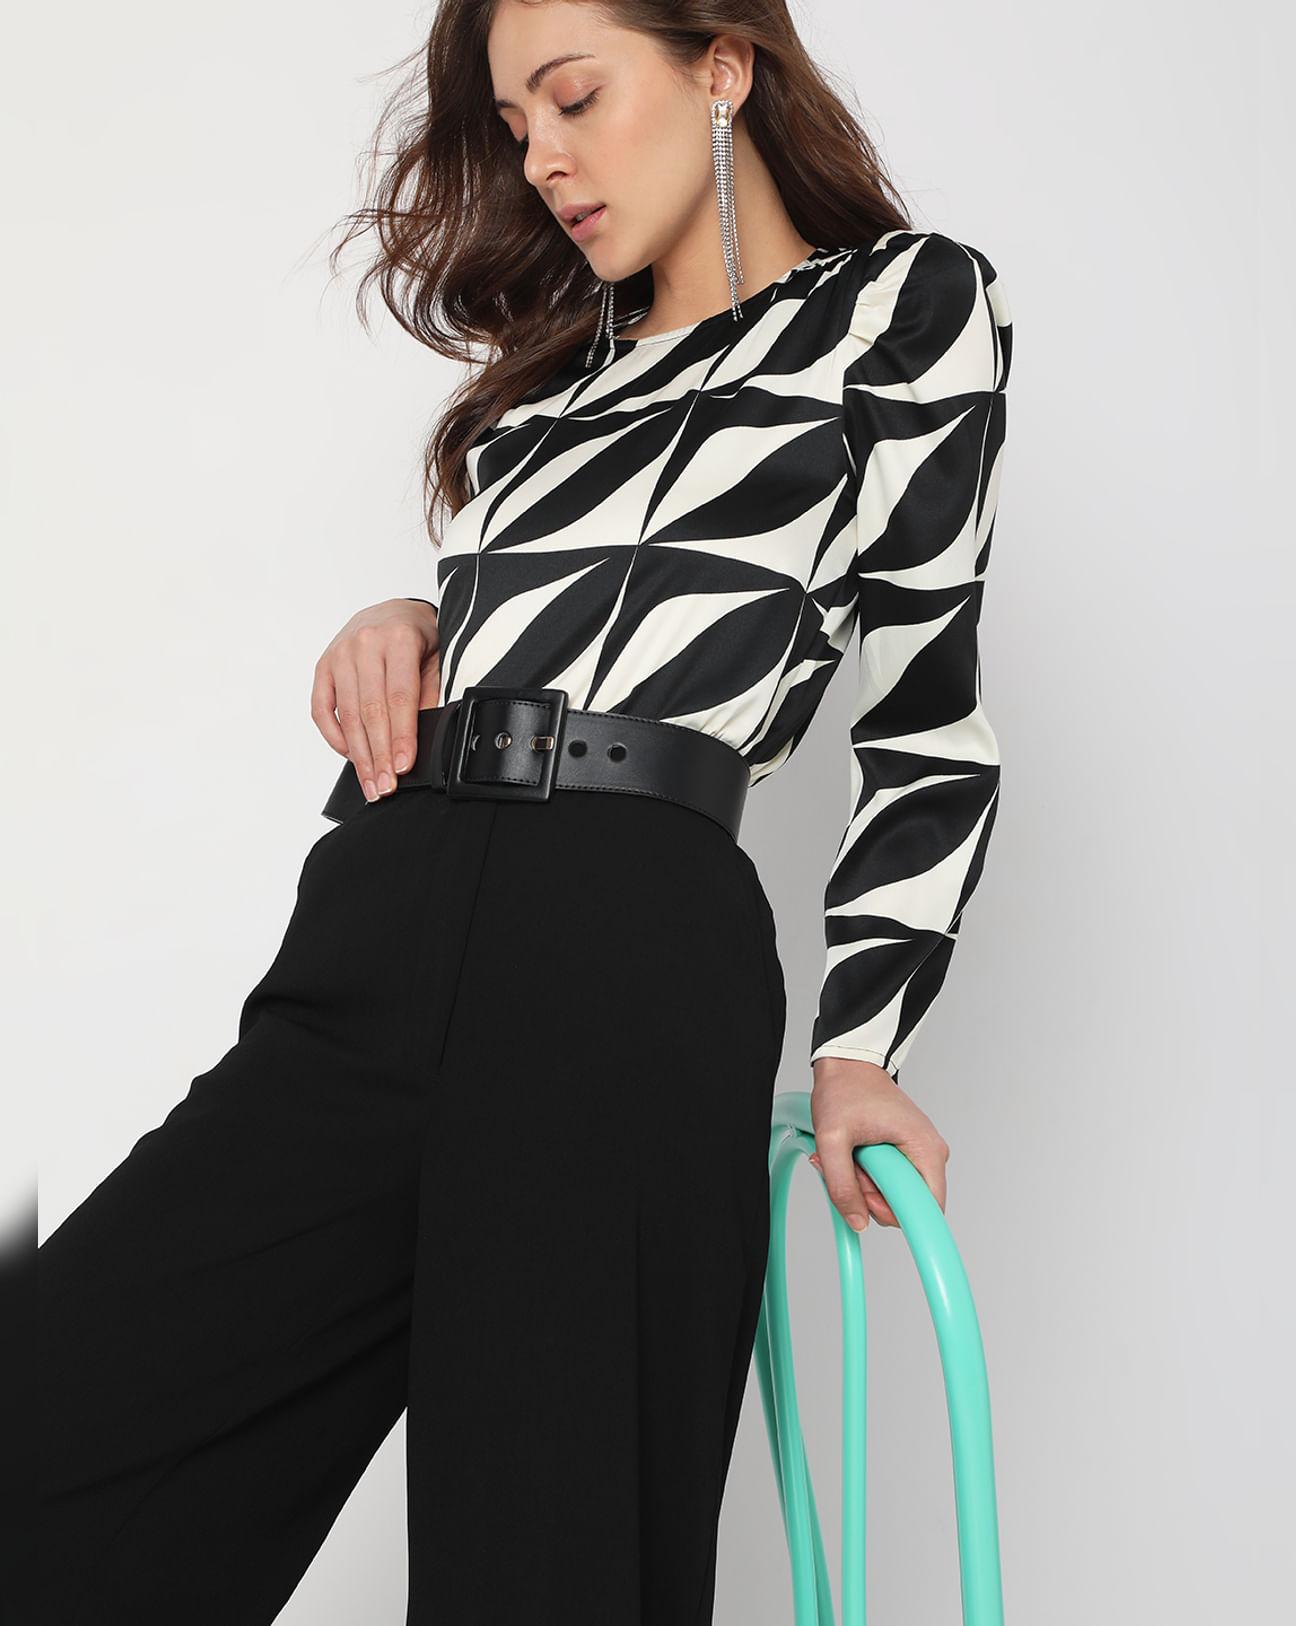 monochrome-abstract-print-top